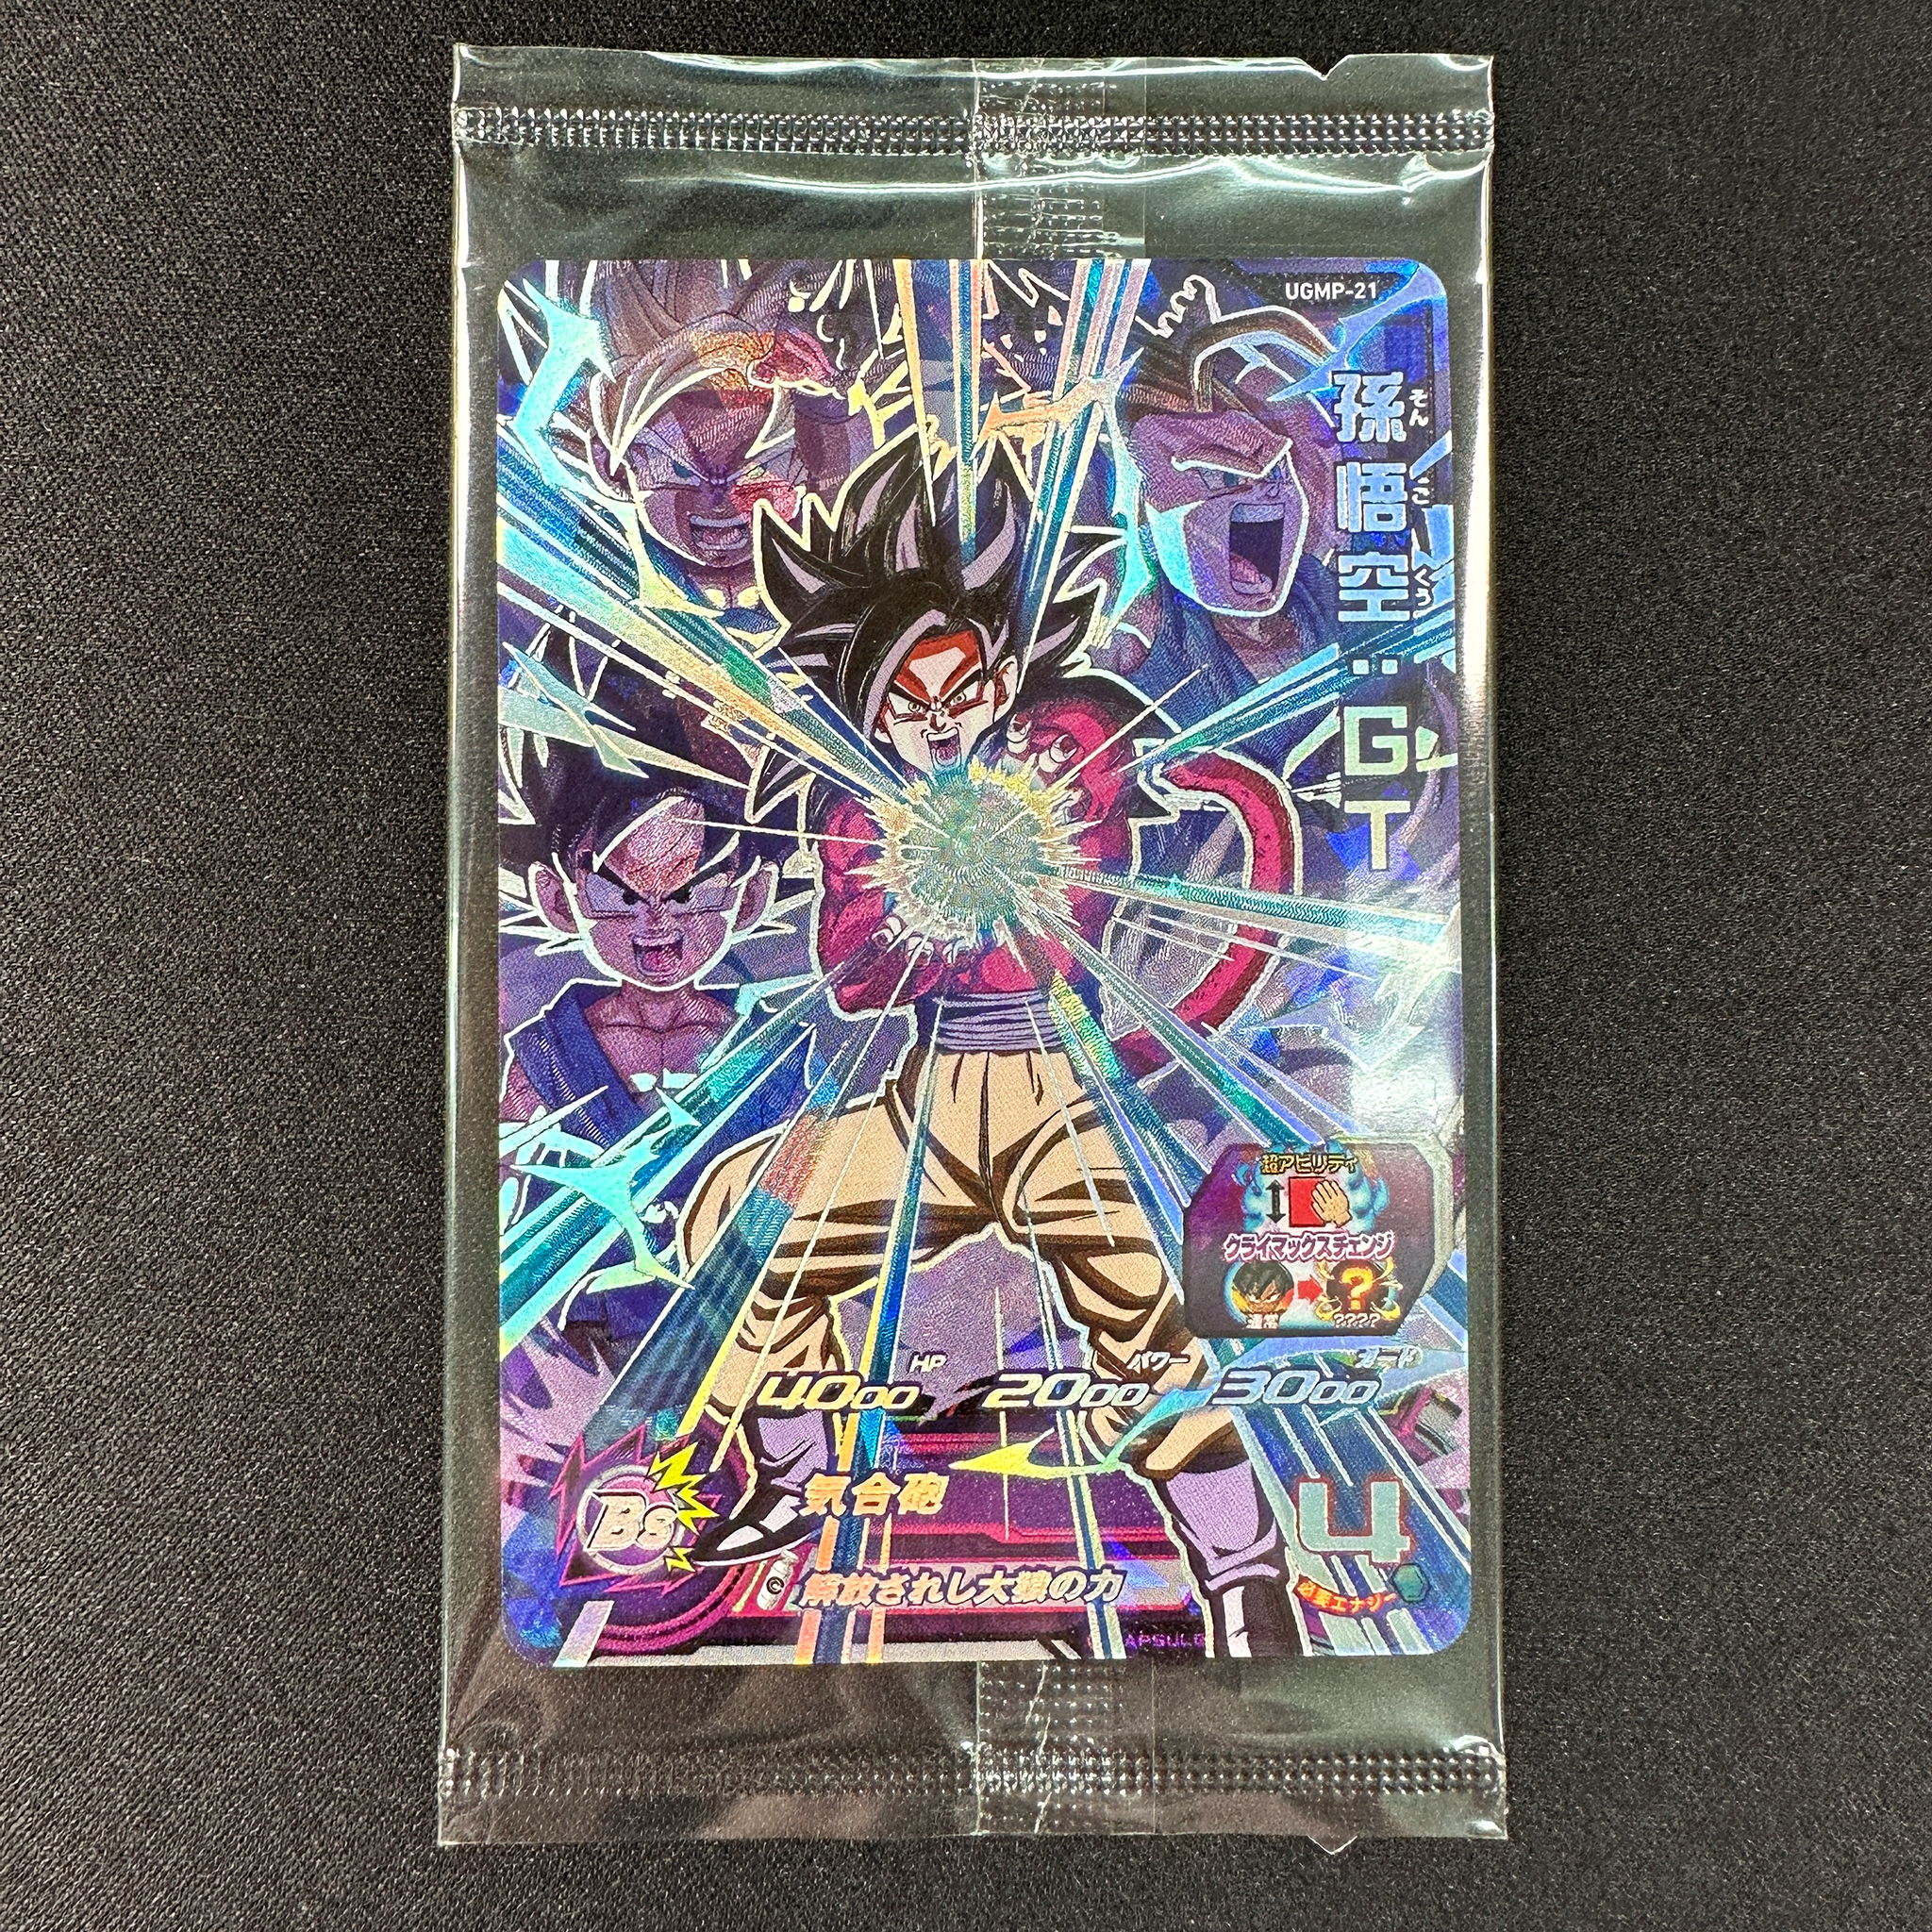 SUPER DRAGON BALL HEROES UGMP-21 in blister Promotional card  Release date: January 12 2023  Son Goku : GT SSJ4